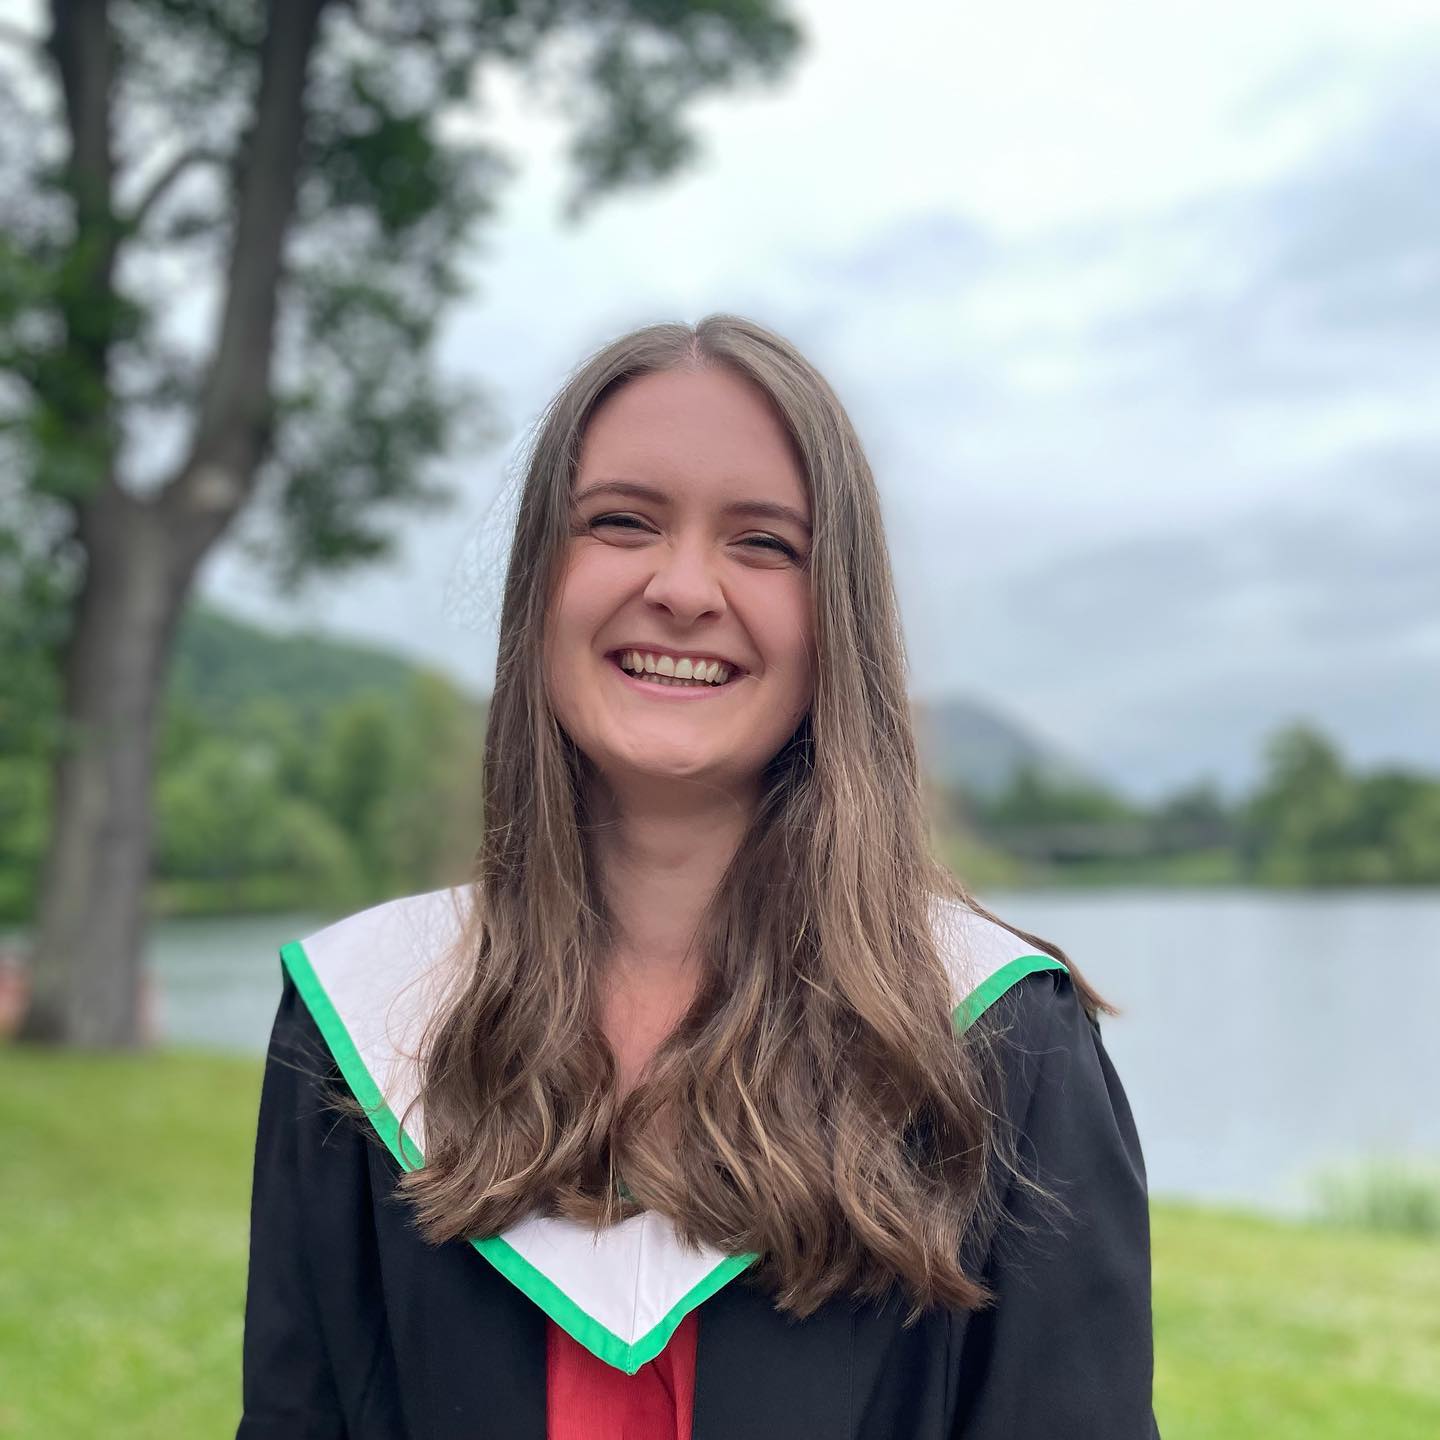 So lovely to celebrate Sarah's success (first class honours psychology degree) over in Stirling this weekend. Proud of her and all she has achieved ️ Many photos were taken! Here are just a few...